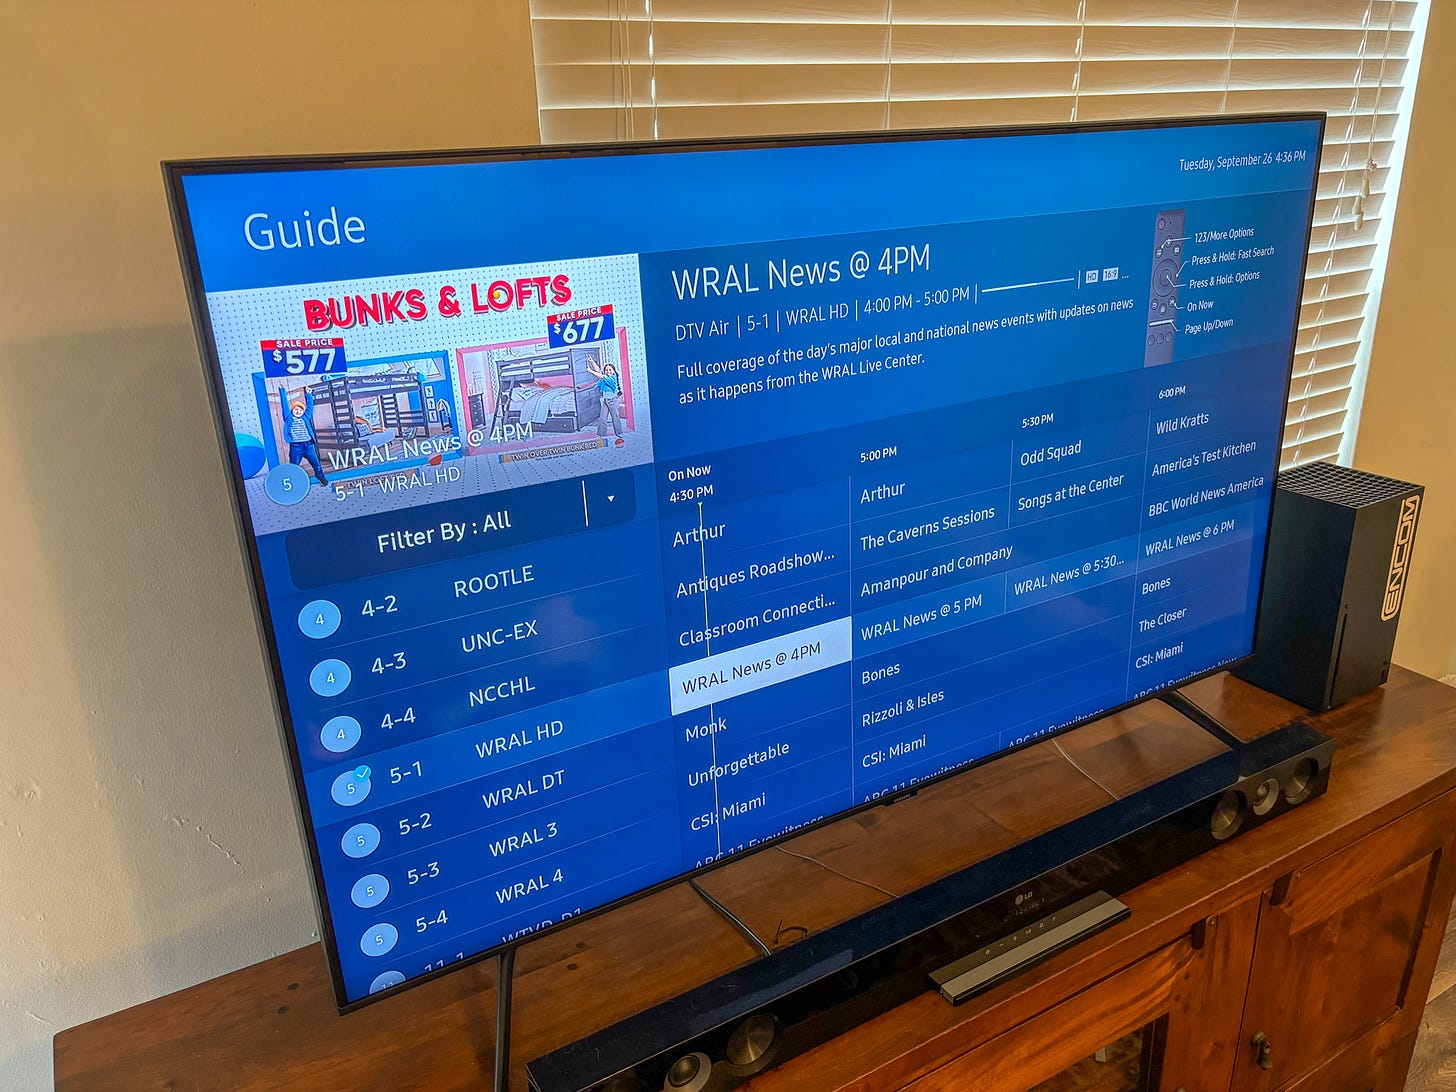 Samsung TV showing TV guide